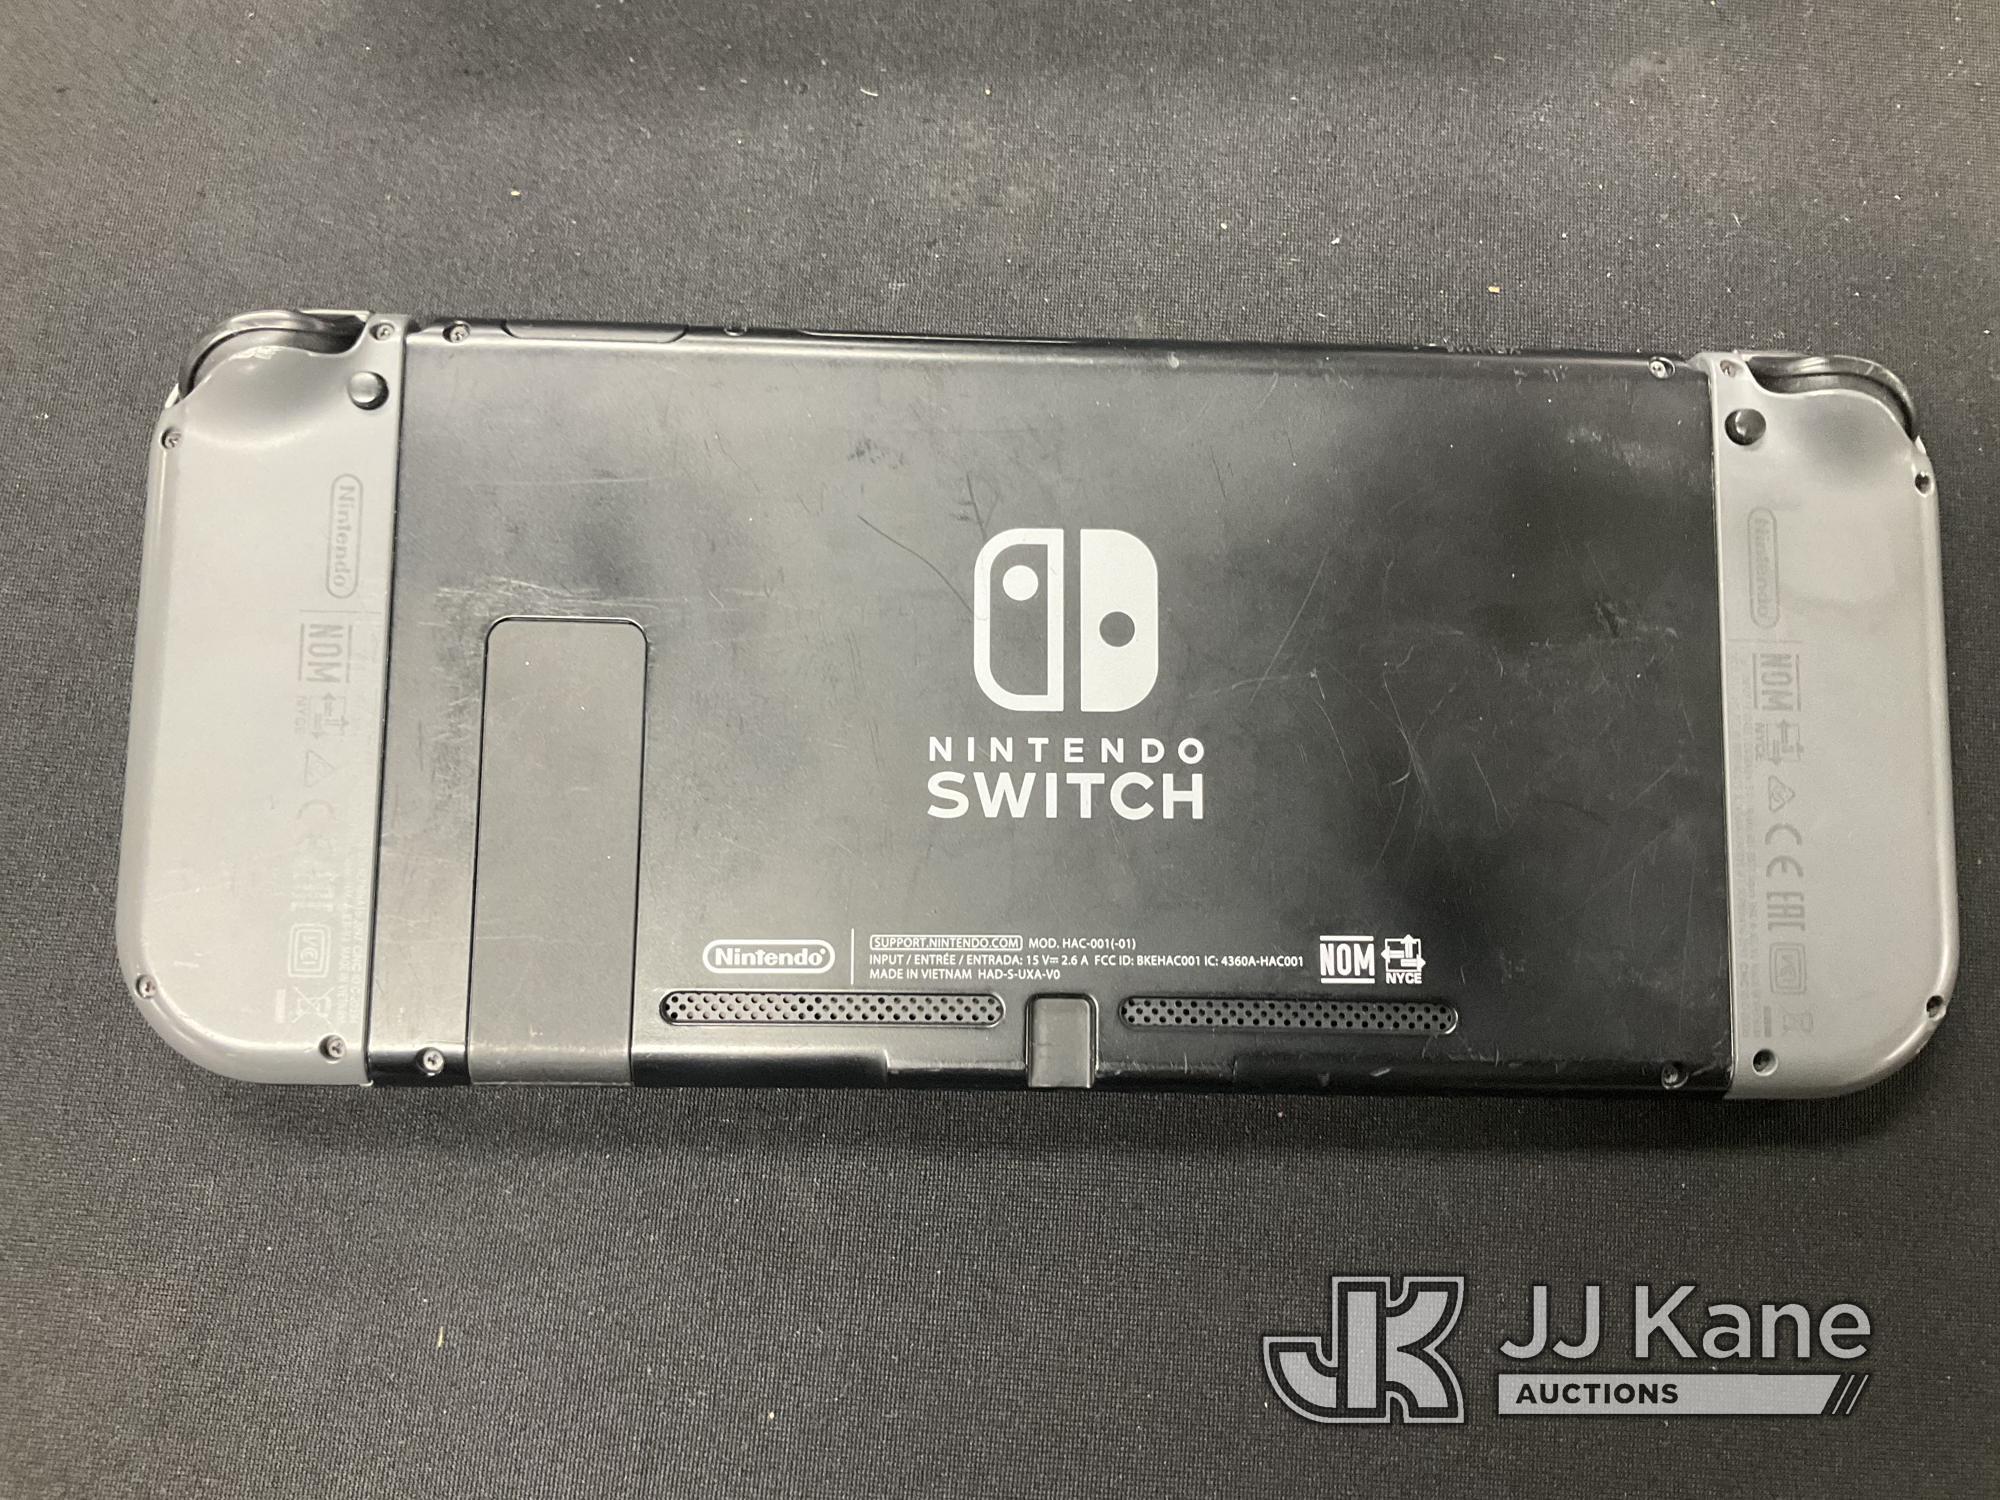 (Jurupa Valley, CA) Nintendo Switch With Dock (Used) NOTE: This unit is being sold AS IS/WHERE IS vi